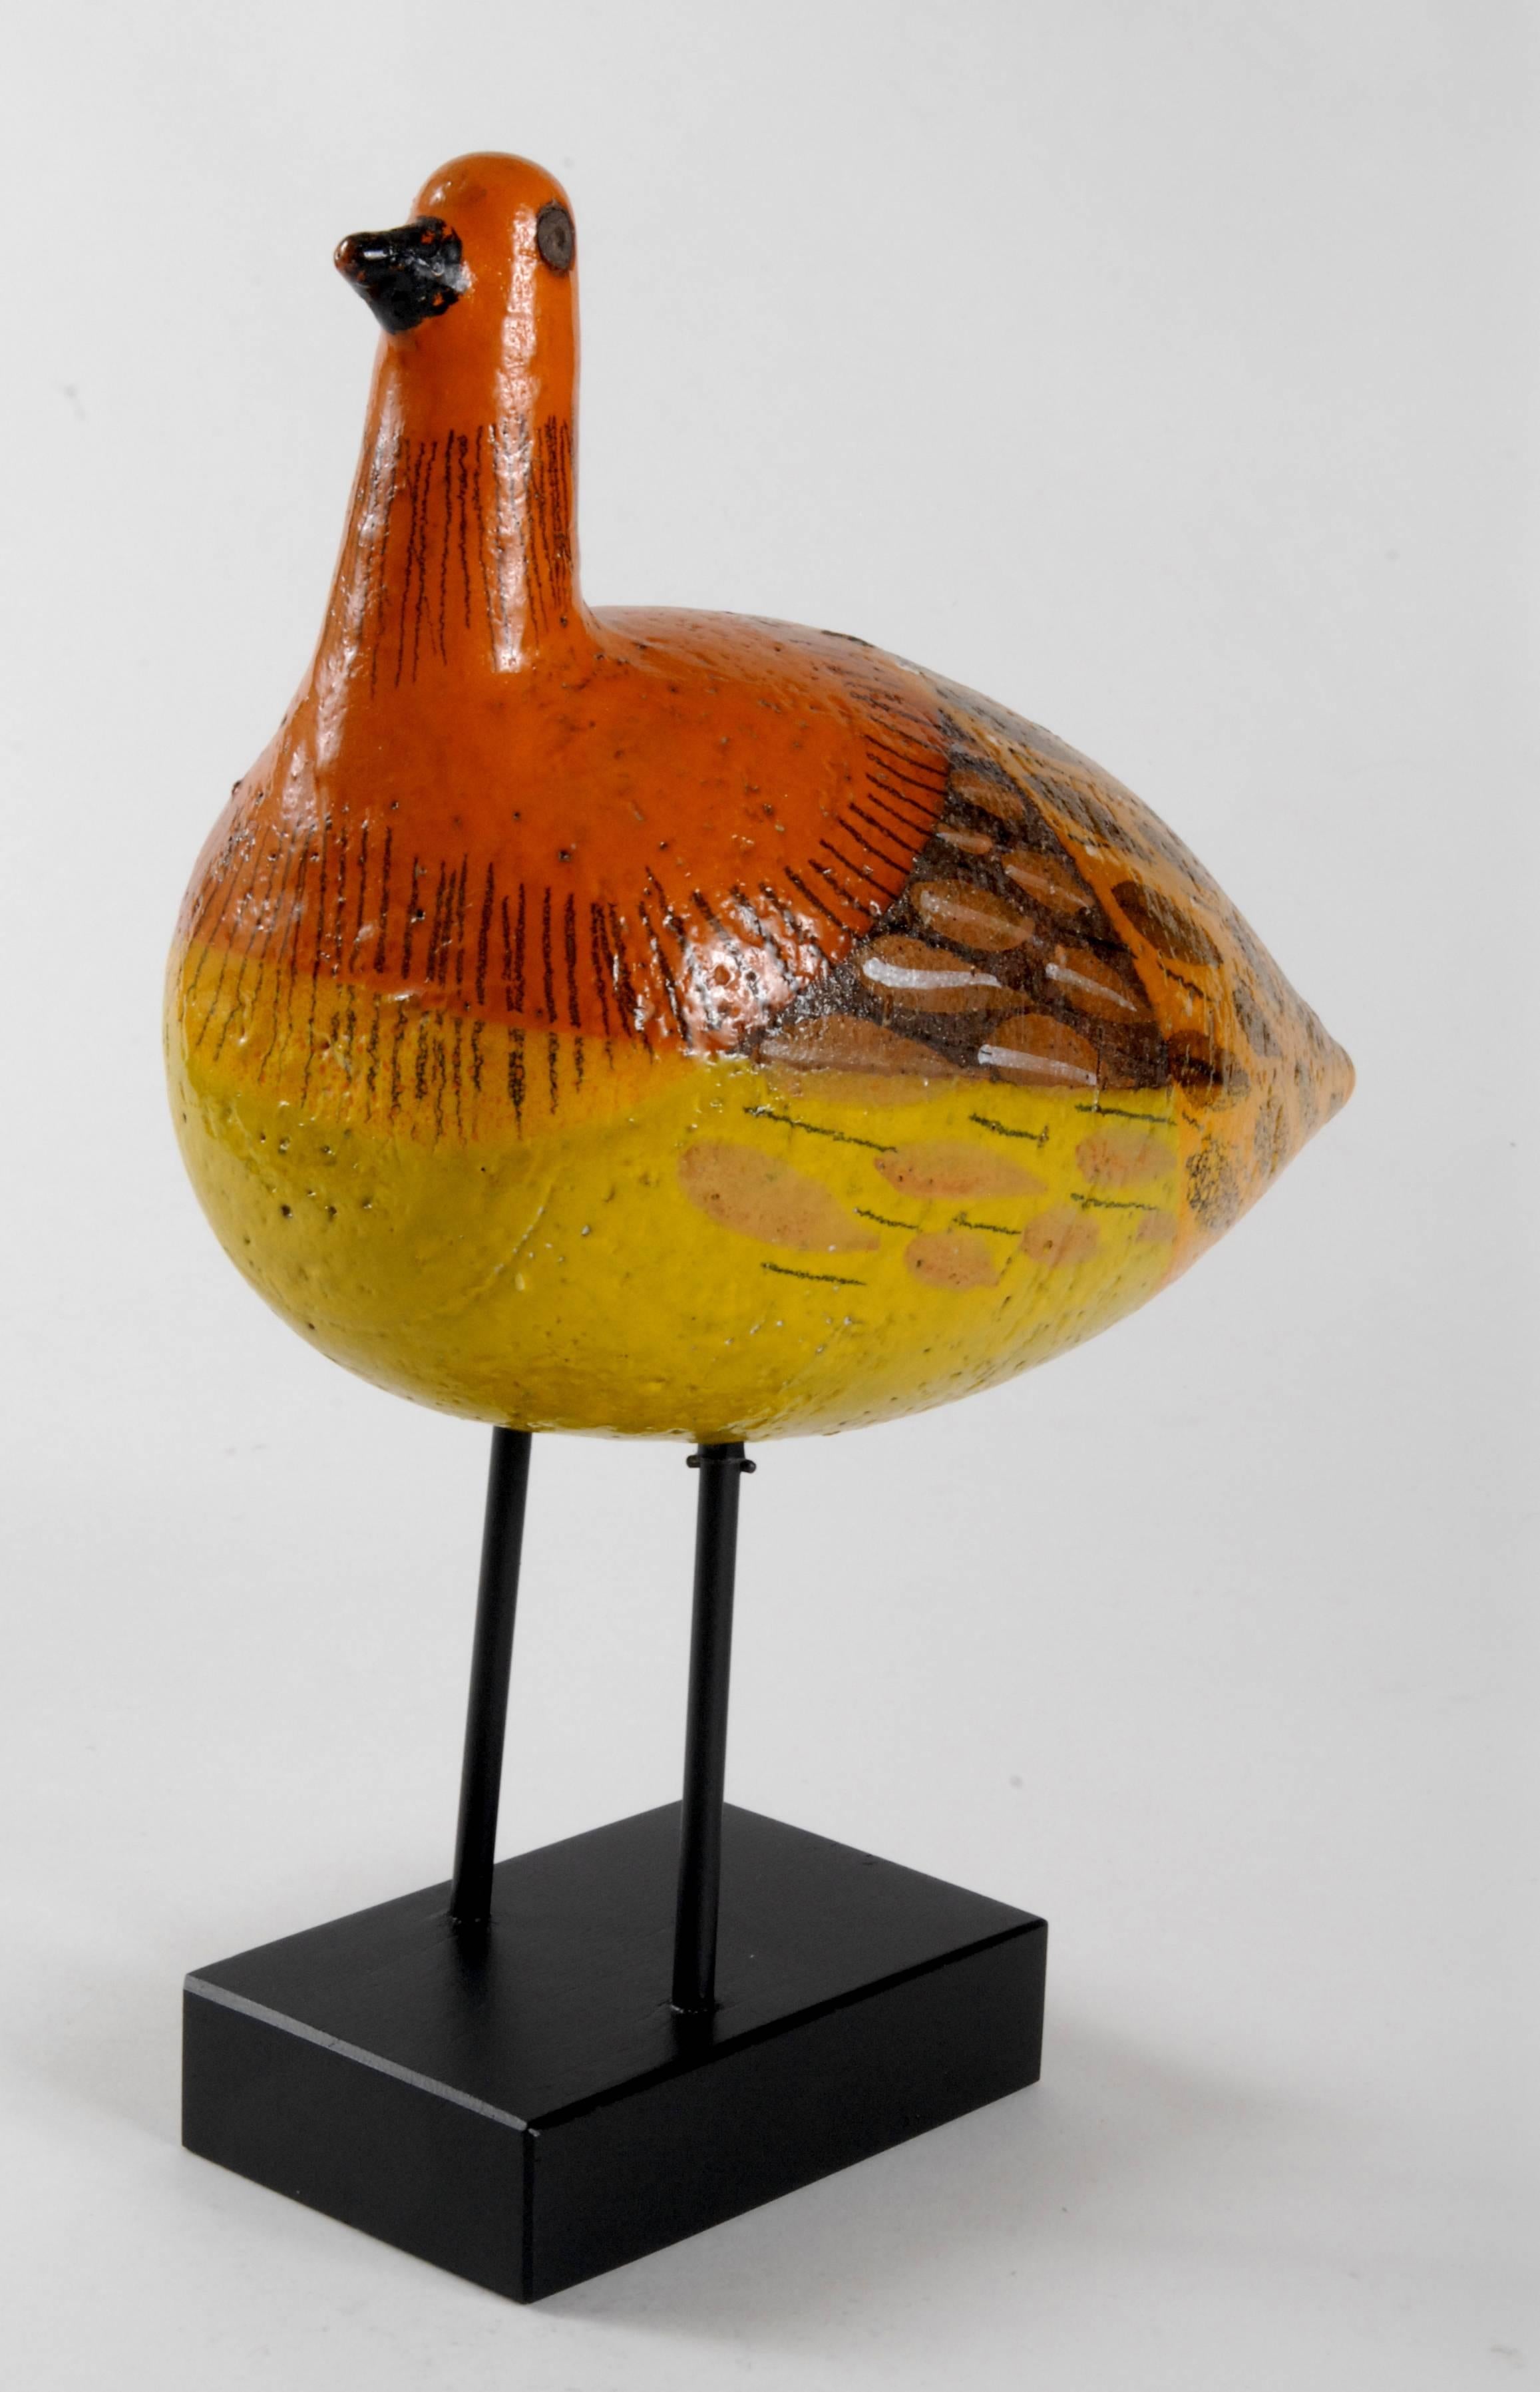 Another inspired Aldo Londi stylized bird from the 1960s, smooth bodied in yellows and oranges and natural brown clay decorated with hand-painted feathers. Timber base in black.